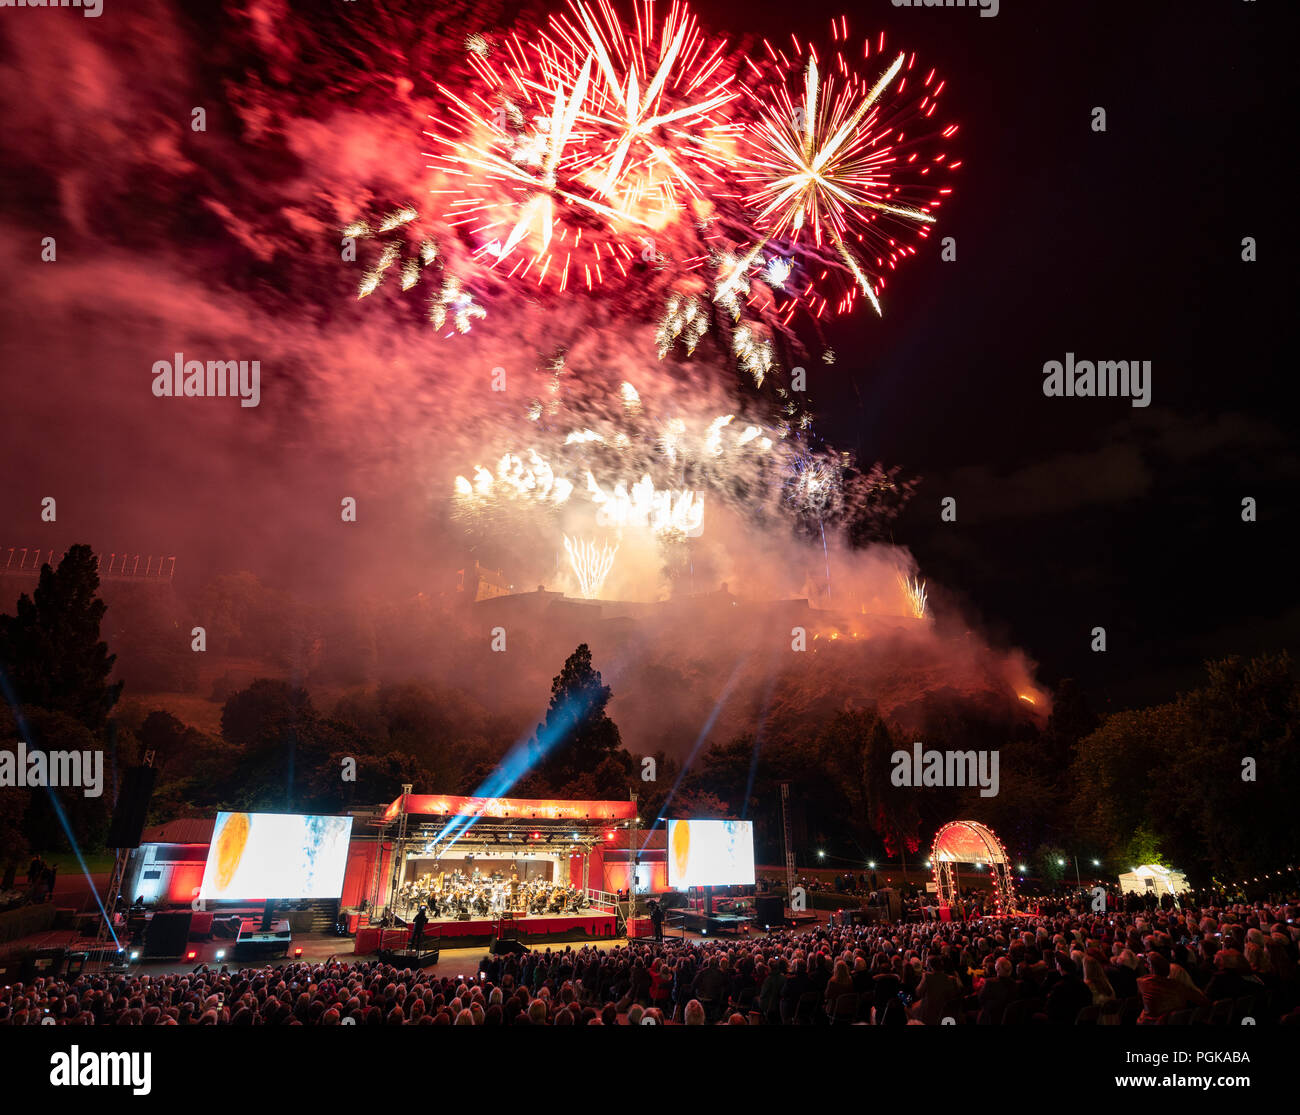 Edinburgh, Scotland, UK. 27 August, 2018. The Edinburgh International Festival concluded with the Virgin Money Fireworks Concert in Princes Street Gardens with a backdrop of Edinburgh Castle. Music by the Scottish Chamber Orchestra playing The Planets by Gustav Holst. Credit: Iain Masterton/Alamy Live News Stock Photo